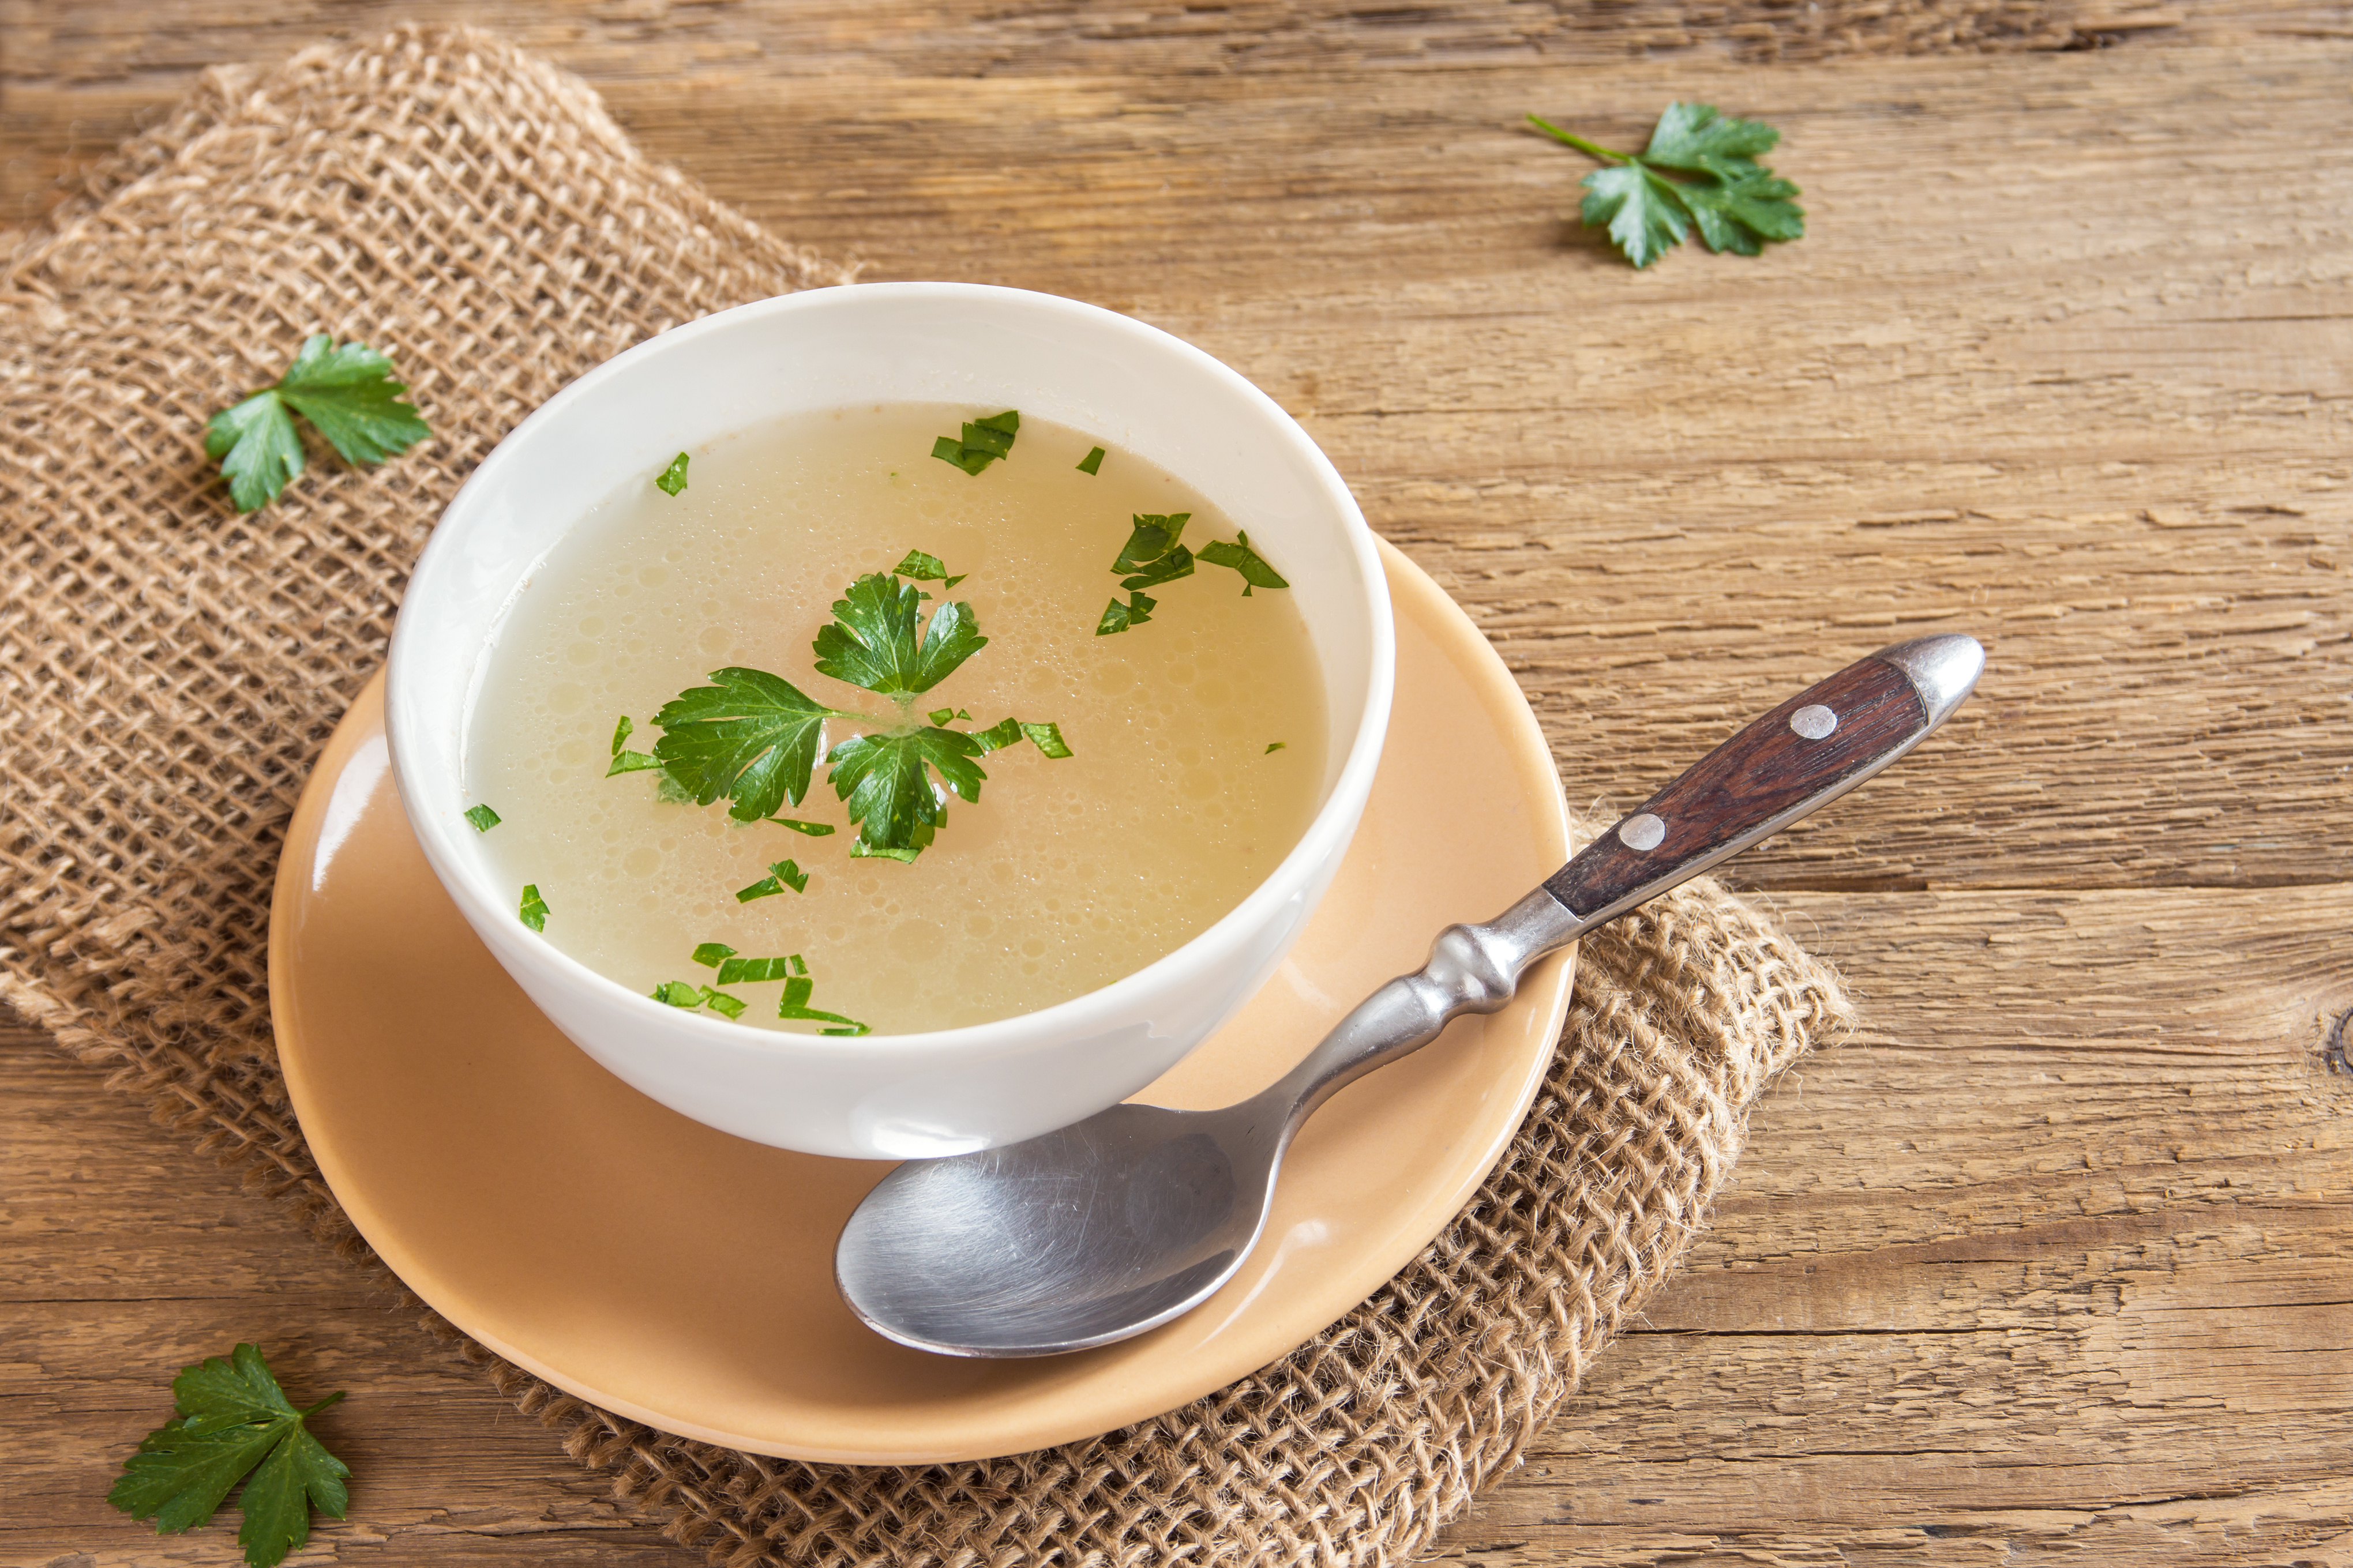 Mineral broth - homemade - recipe - bauman college - nutrients - nutrition - health and wellness - make your own - broth - soup - healthy habits - healthy living